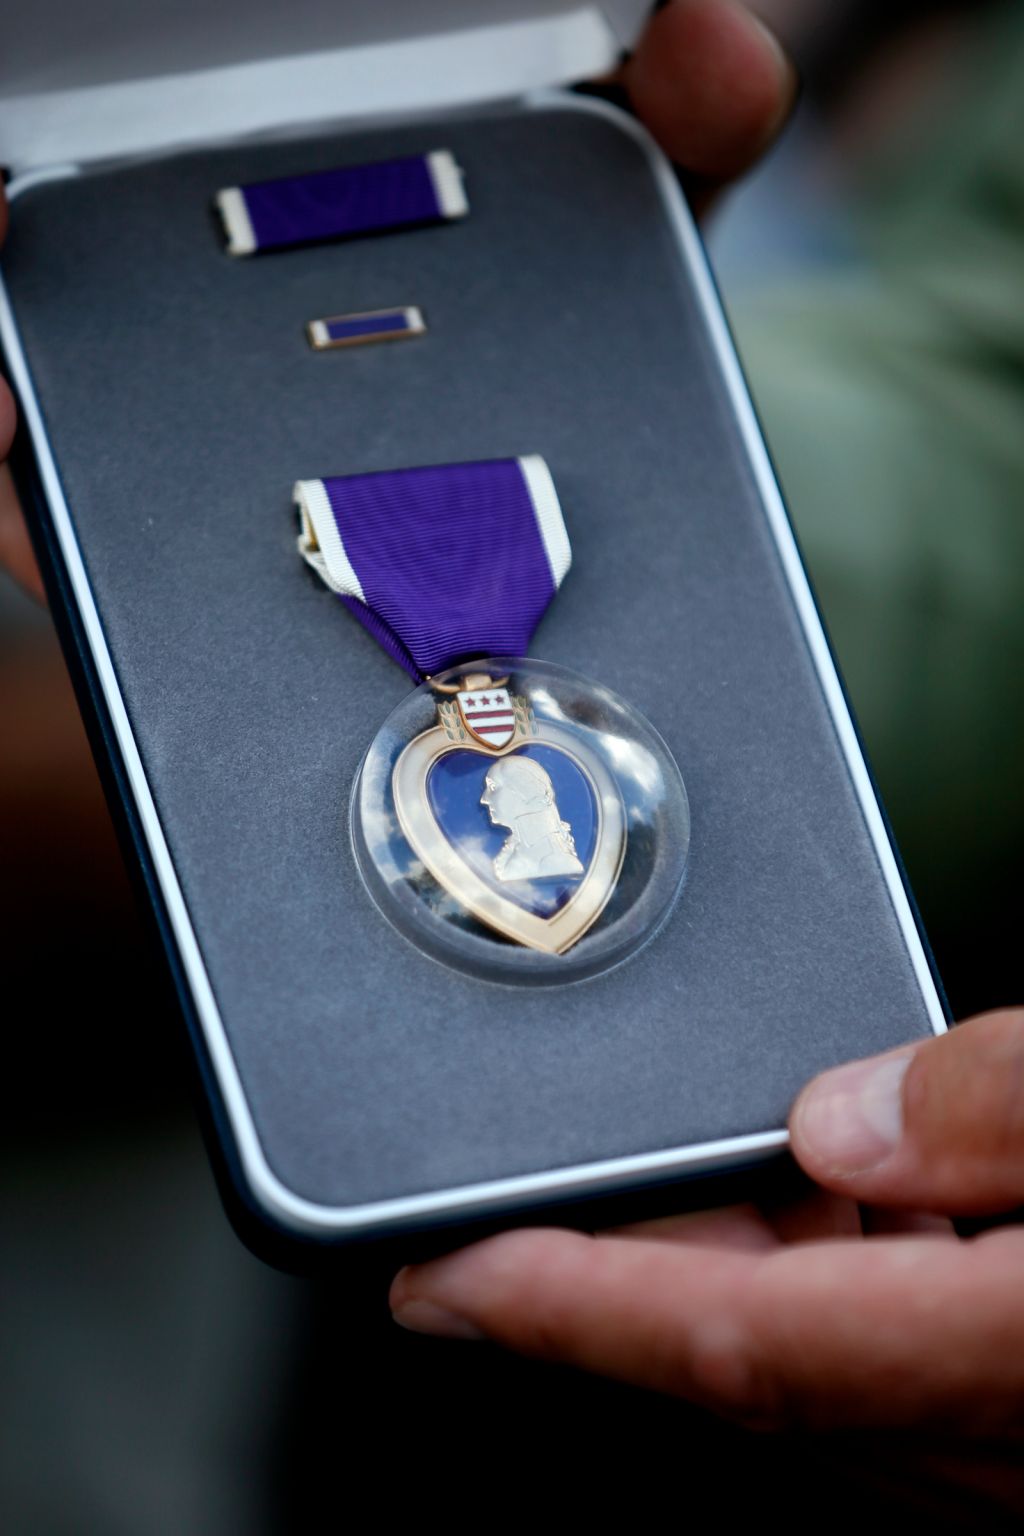 Stephen Dufeck never received the Purple Heart for wounds he suffered in Vietnam during an enemy rocket and mortar attack. Now, 45 years later, he will finally get the honor he deserved.] JERRY HOLT ‚Ä¢ jerry.holt@startribune.com